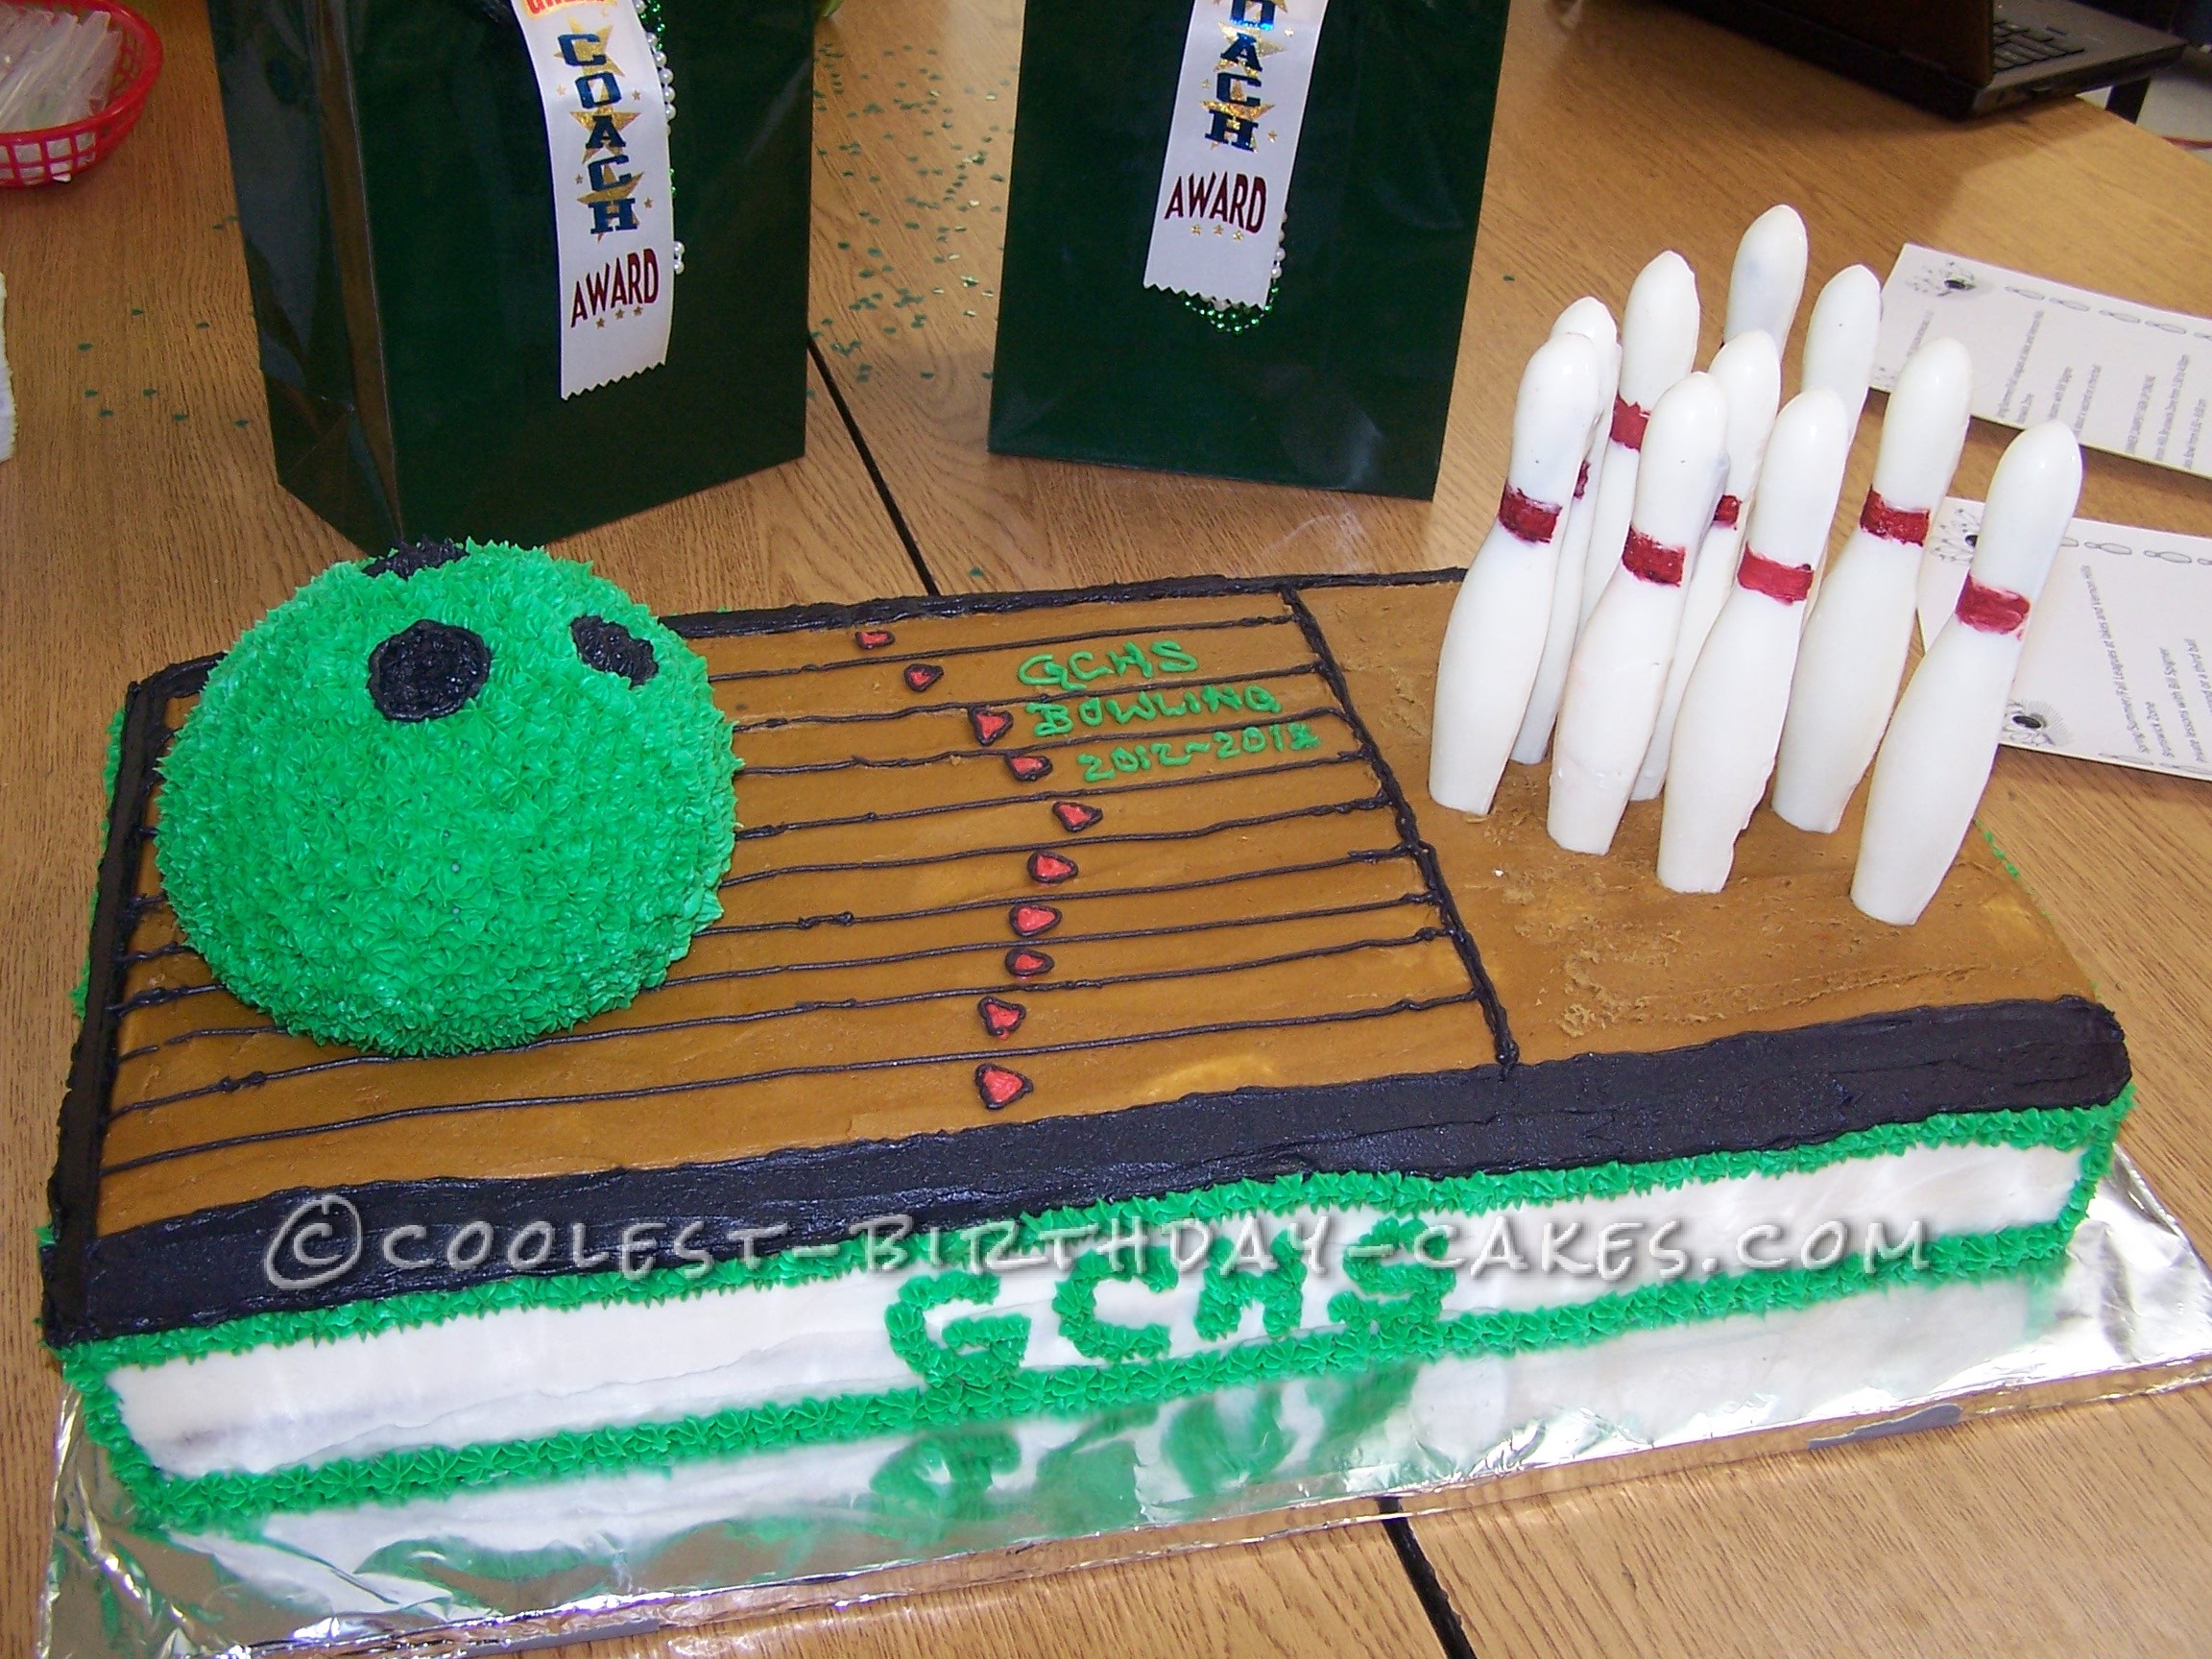 Coolest Bowling Cake